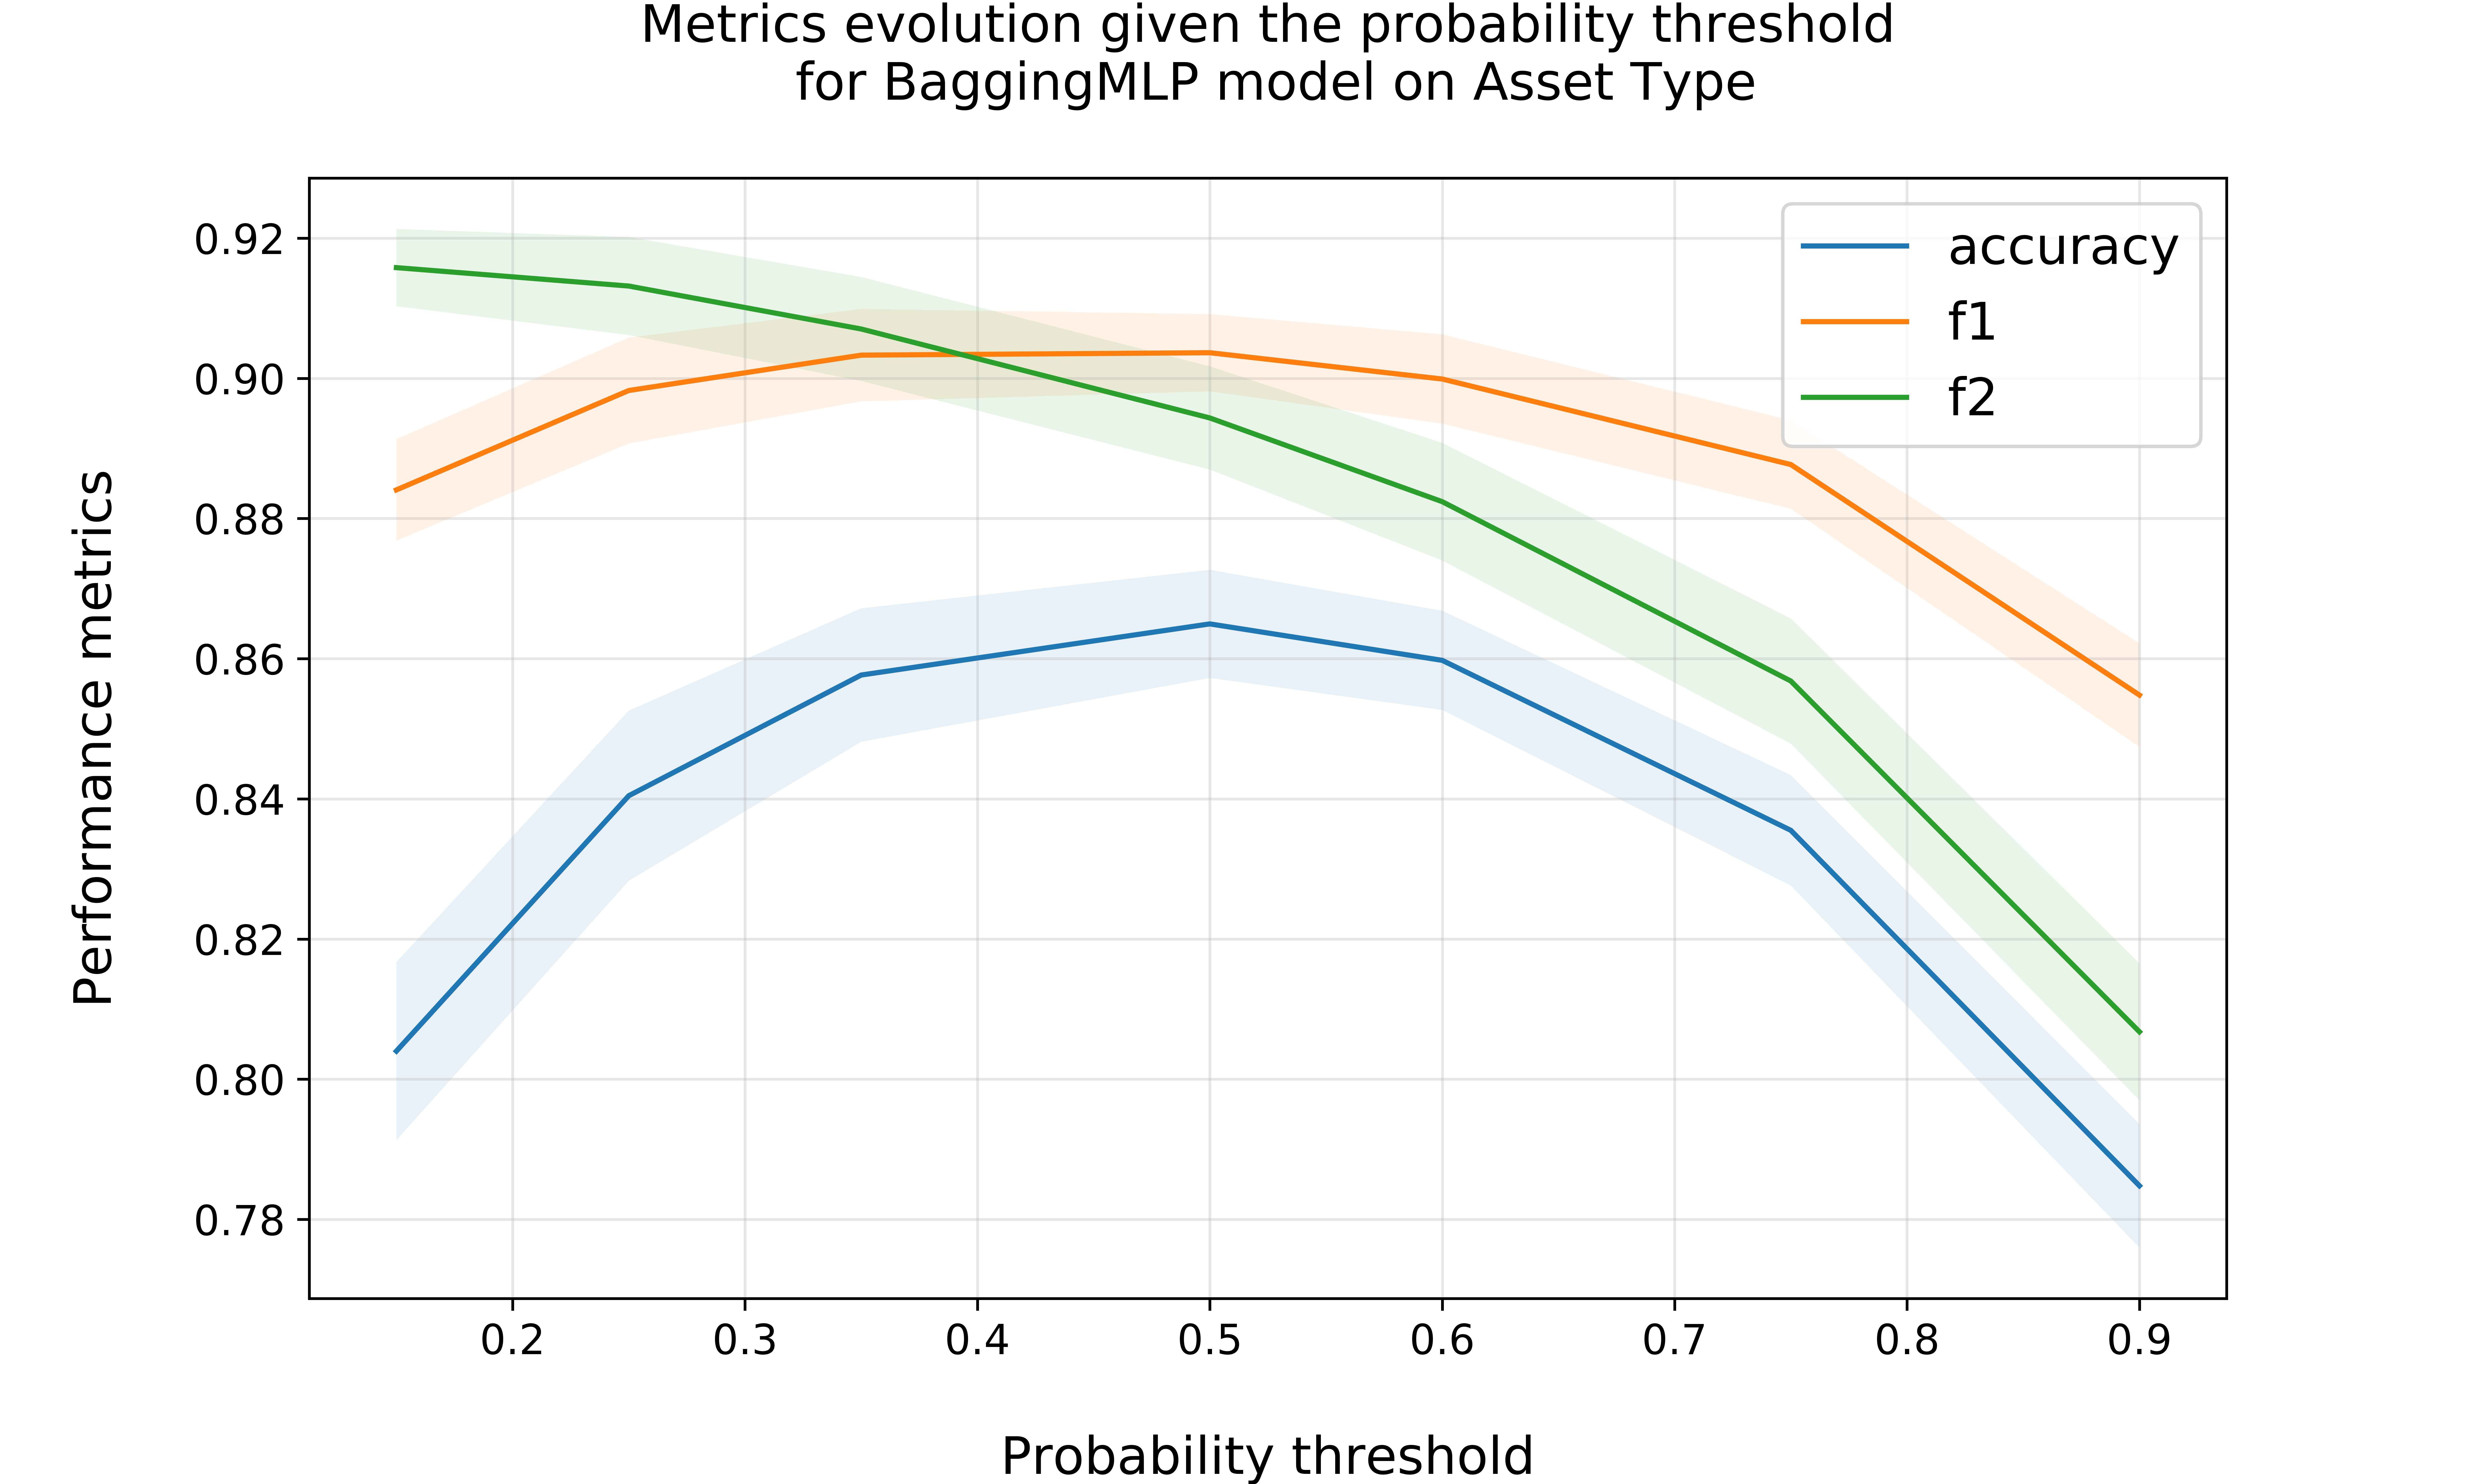 Probability threshold influence on BaggingMLP's performance for Asset Type. 